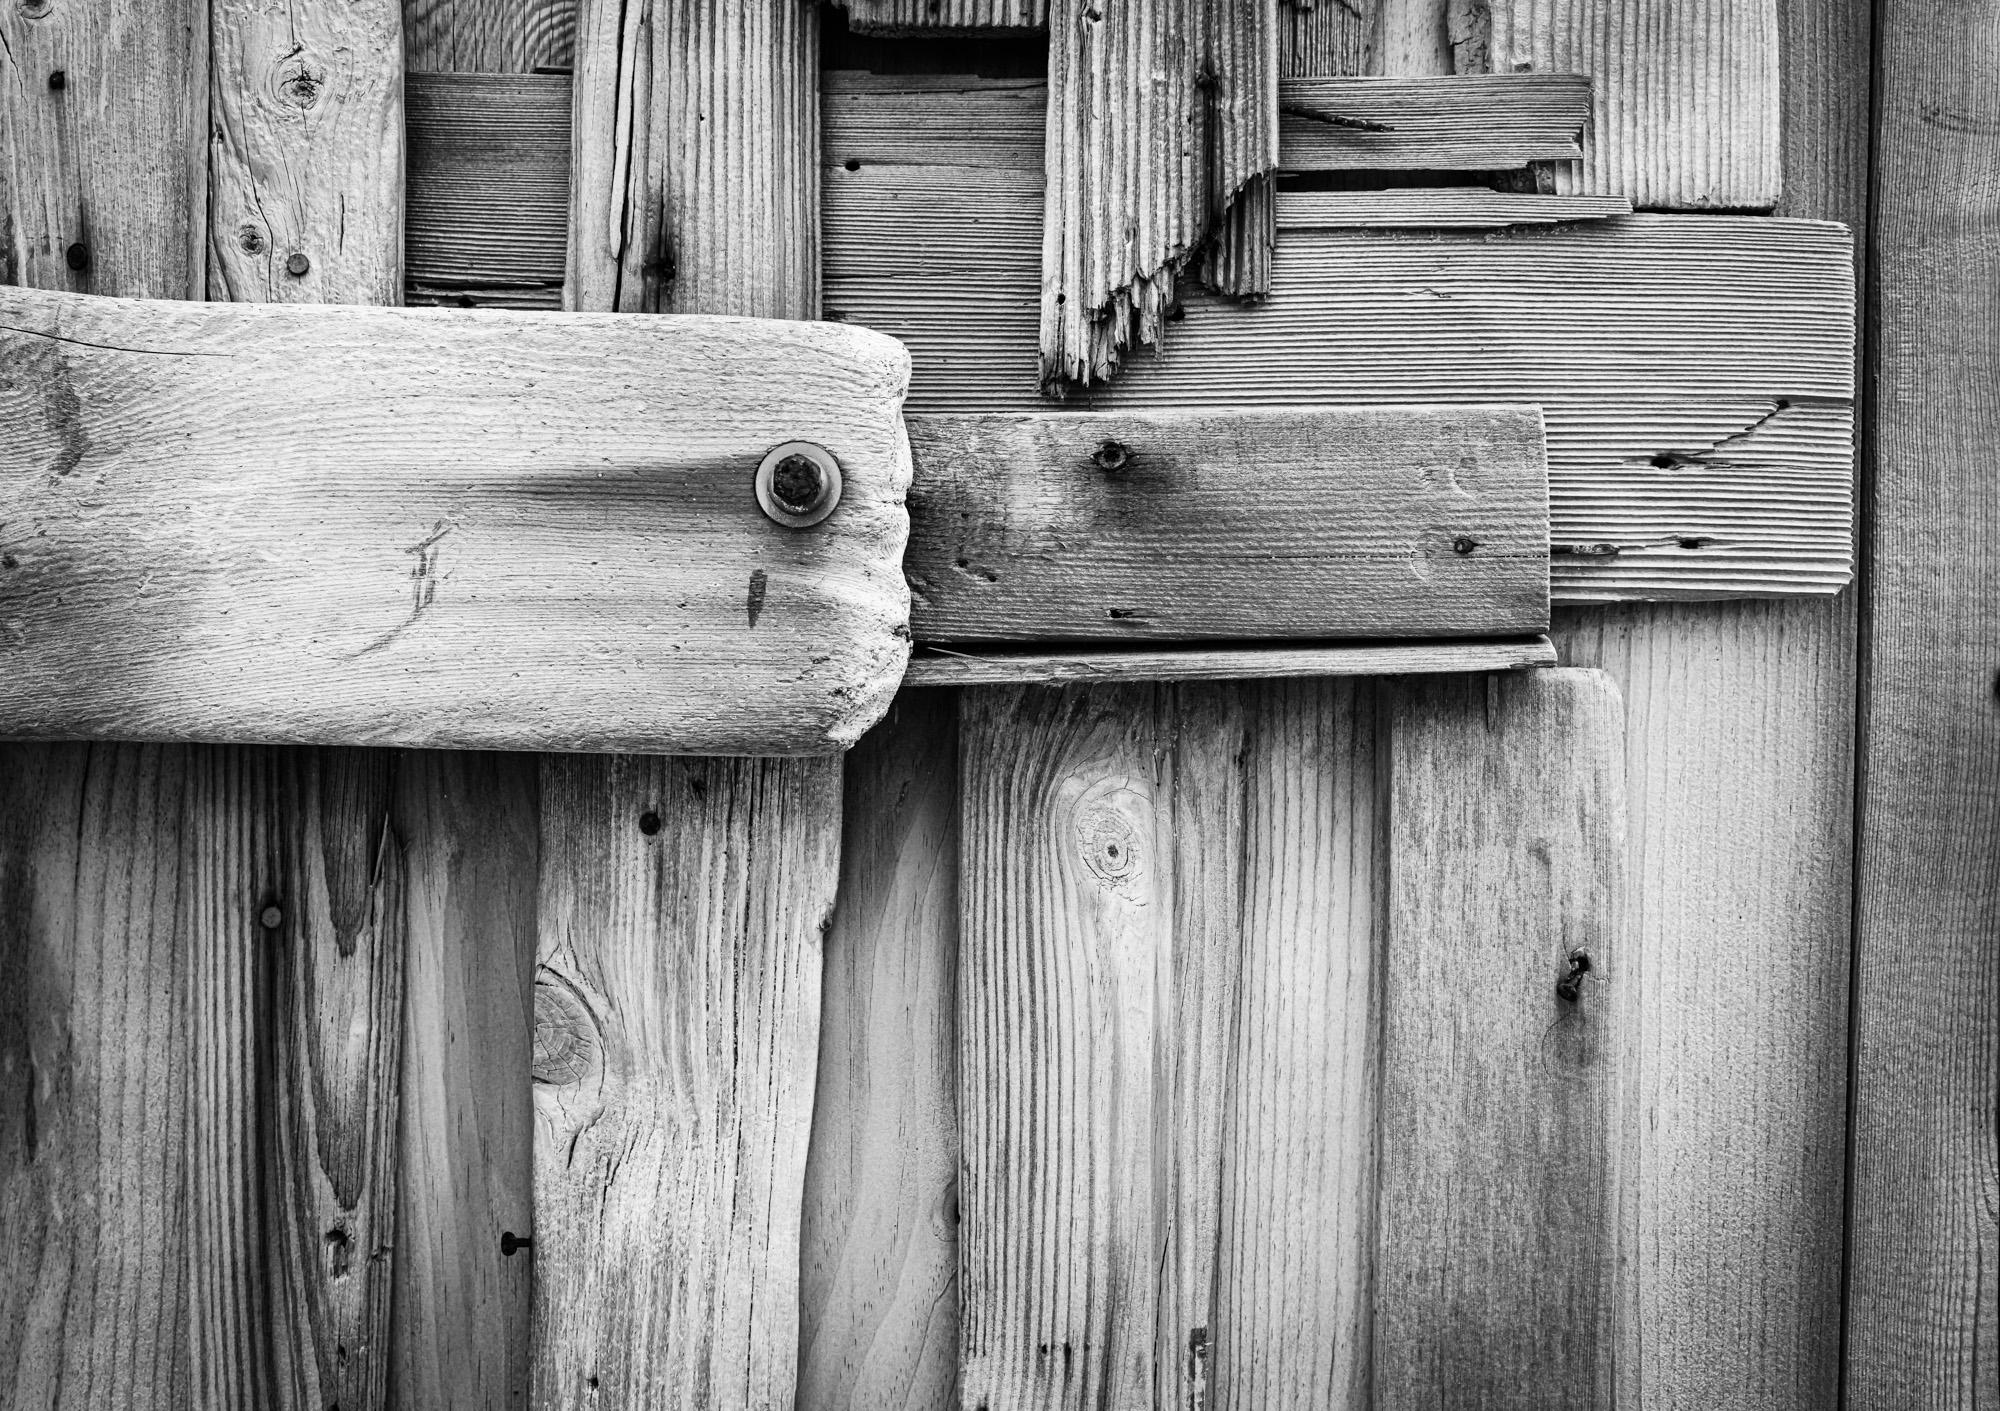 Howard Lewis Still-Life Photograph - Black and White Photograph Cape Cod "Driftwood Siding"